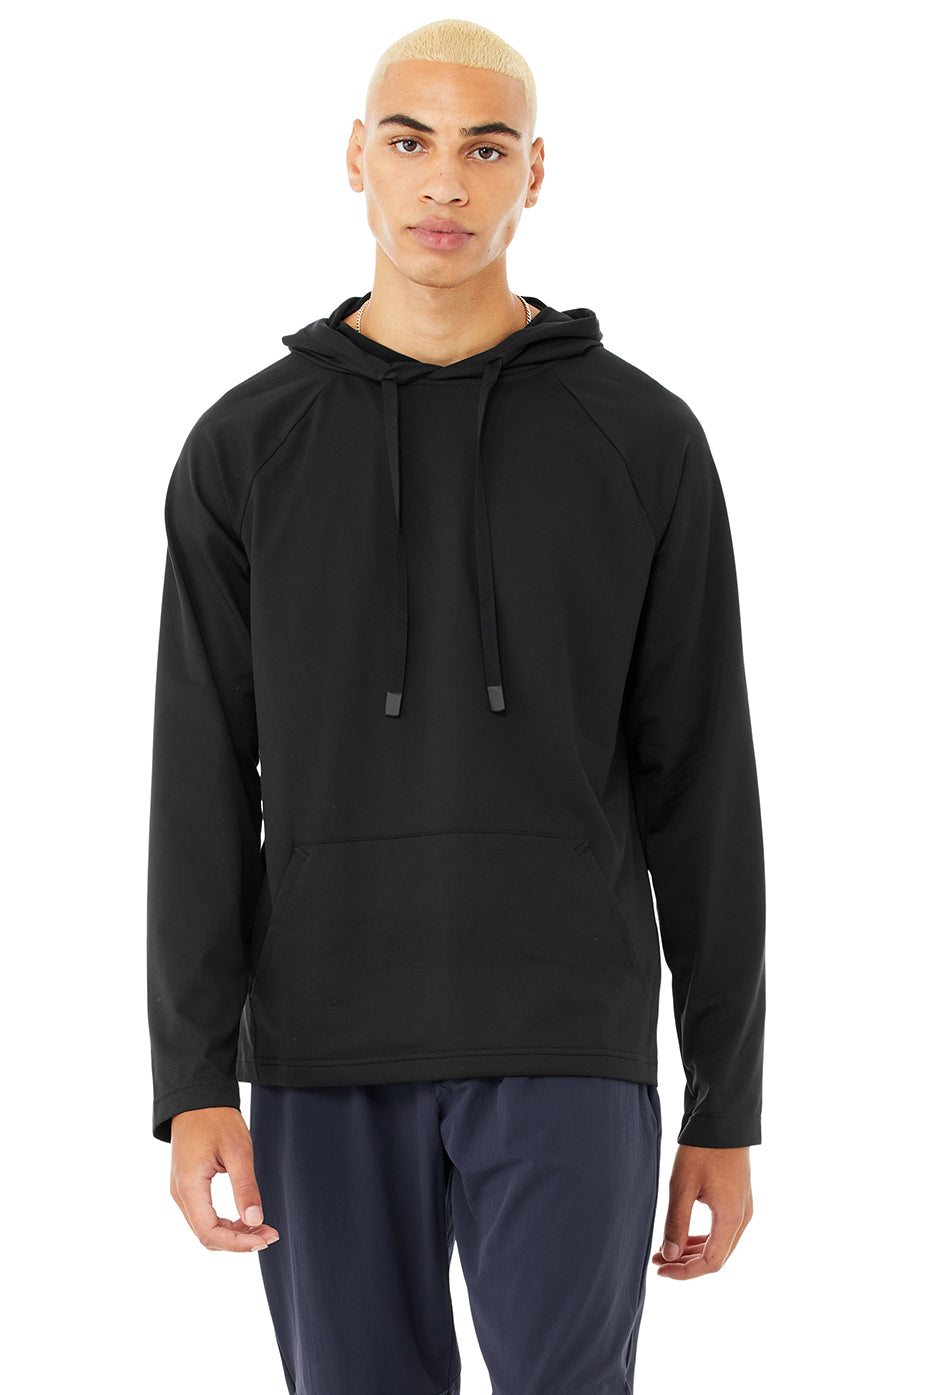 ALO ACCOLADE HOODIE Color Black , size XXS NW0T